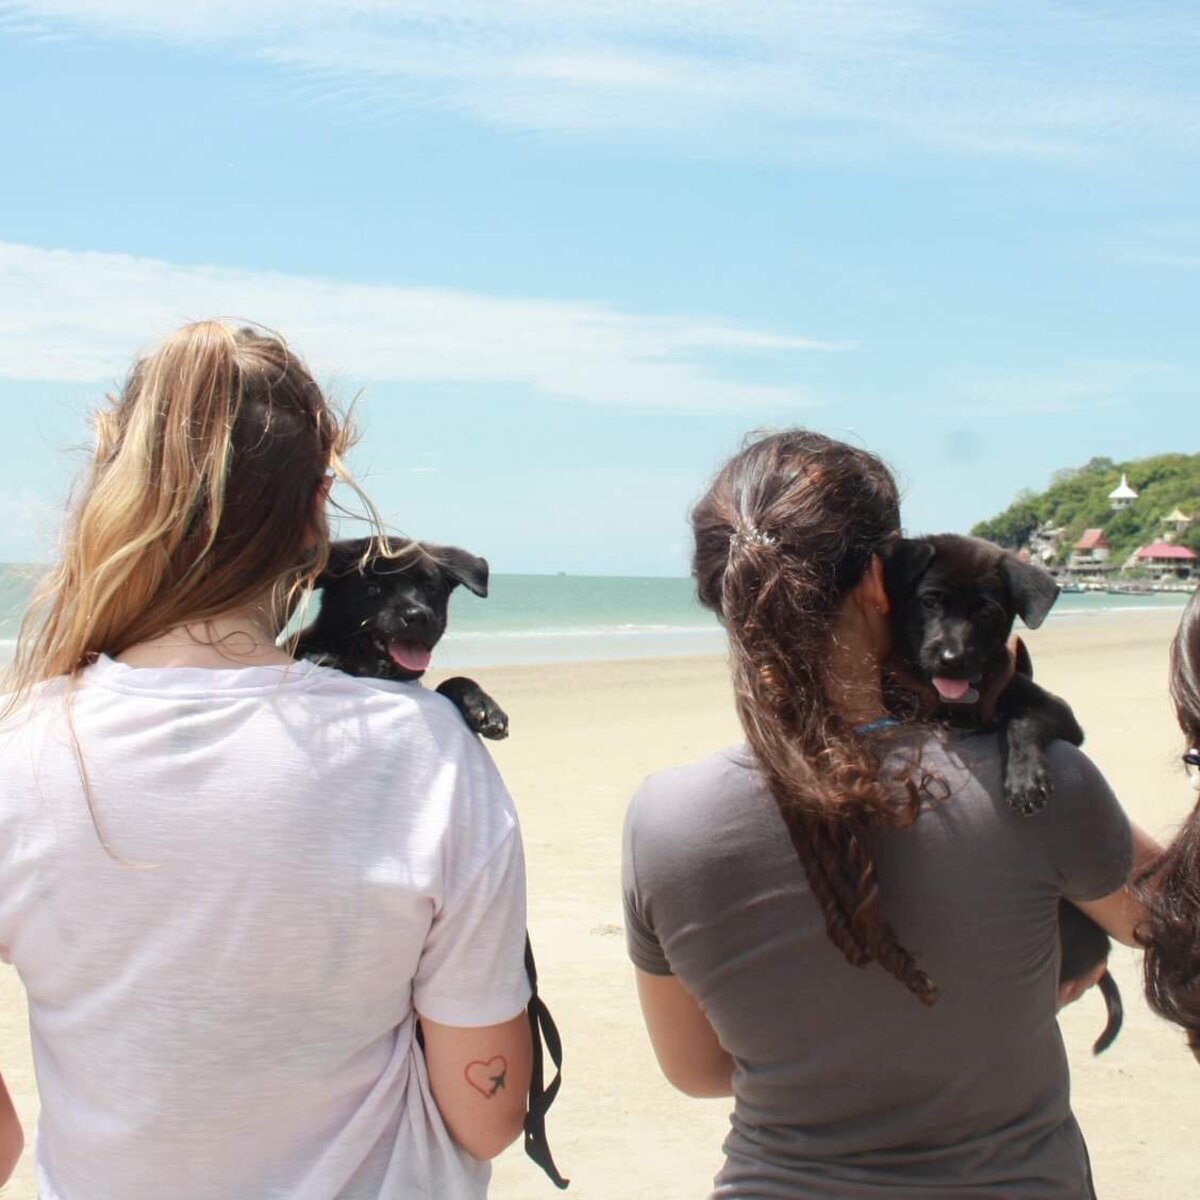 People holding puppies on beach in Thailand